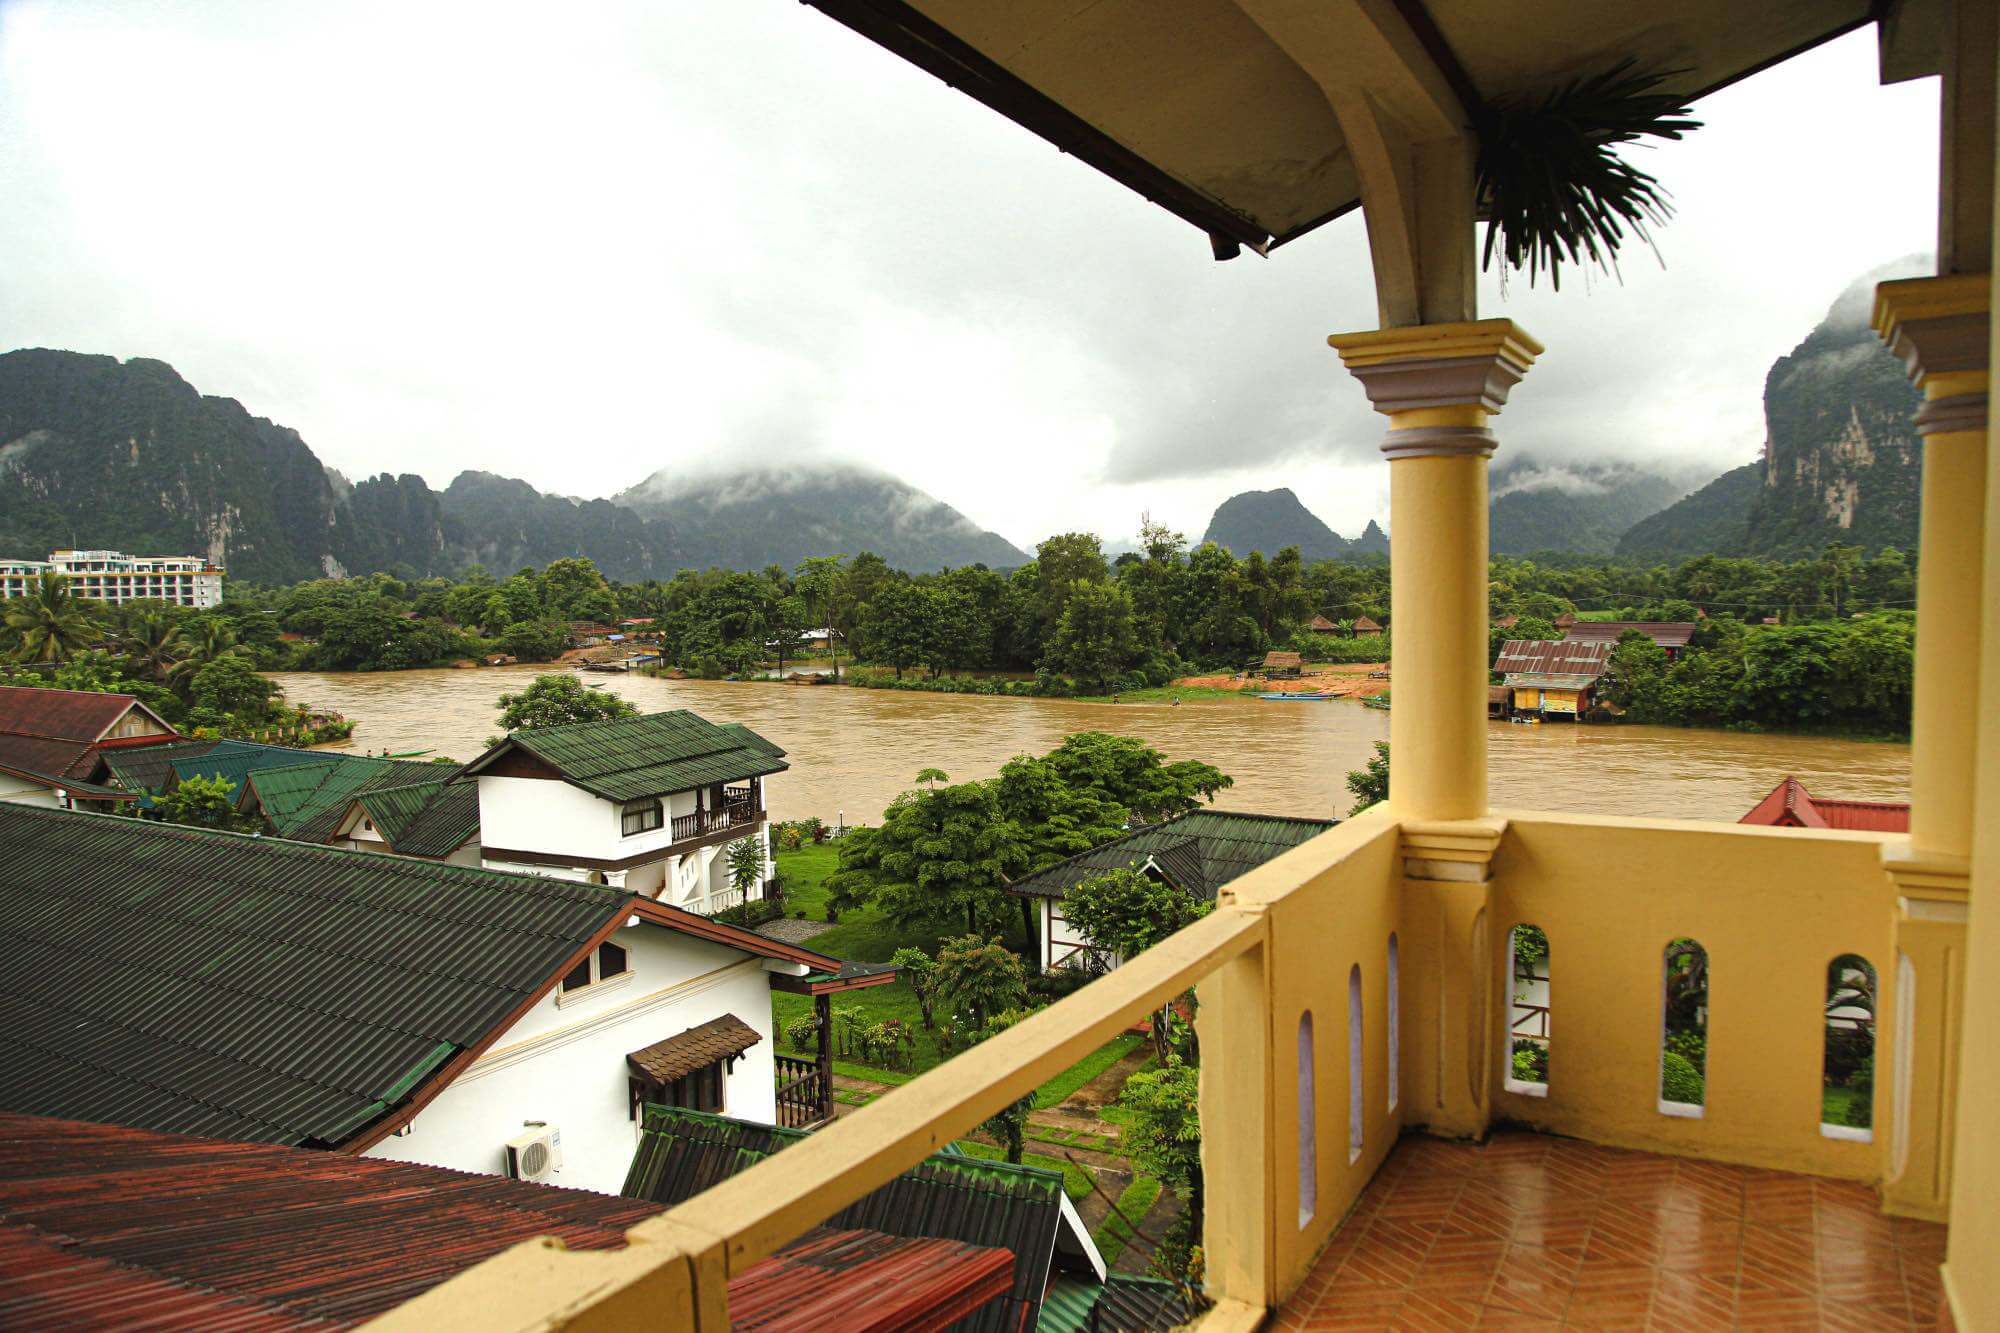 View of the river in Vang Vieng Laos 